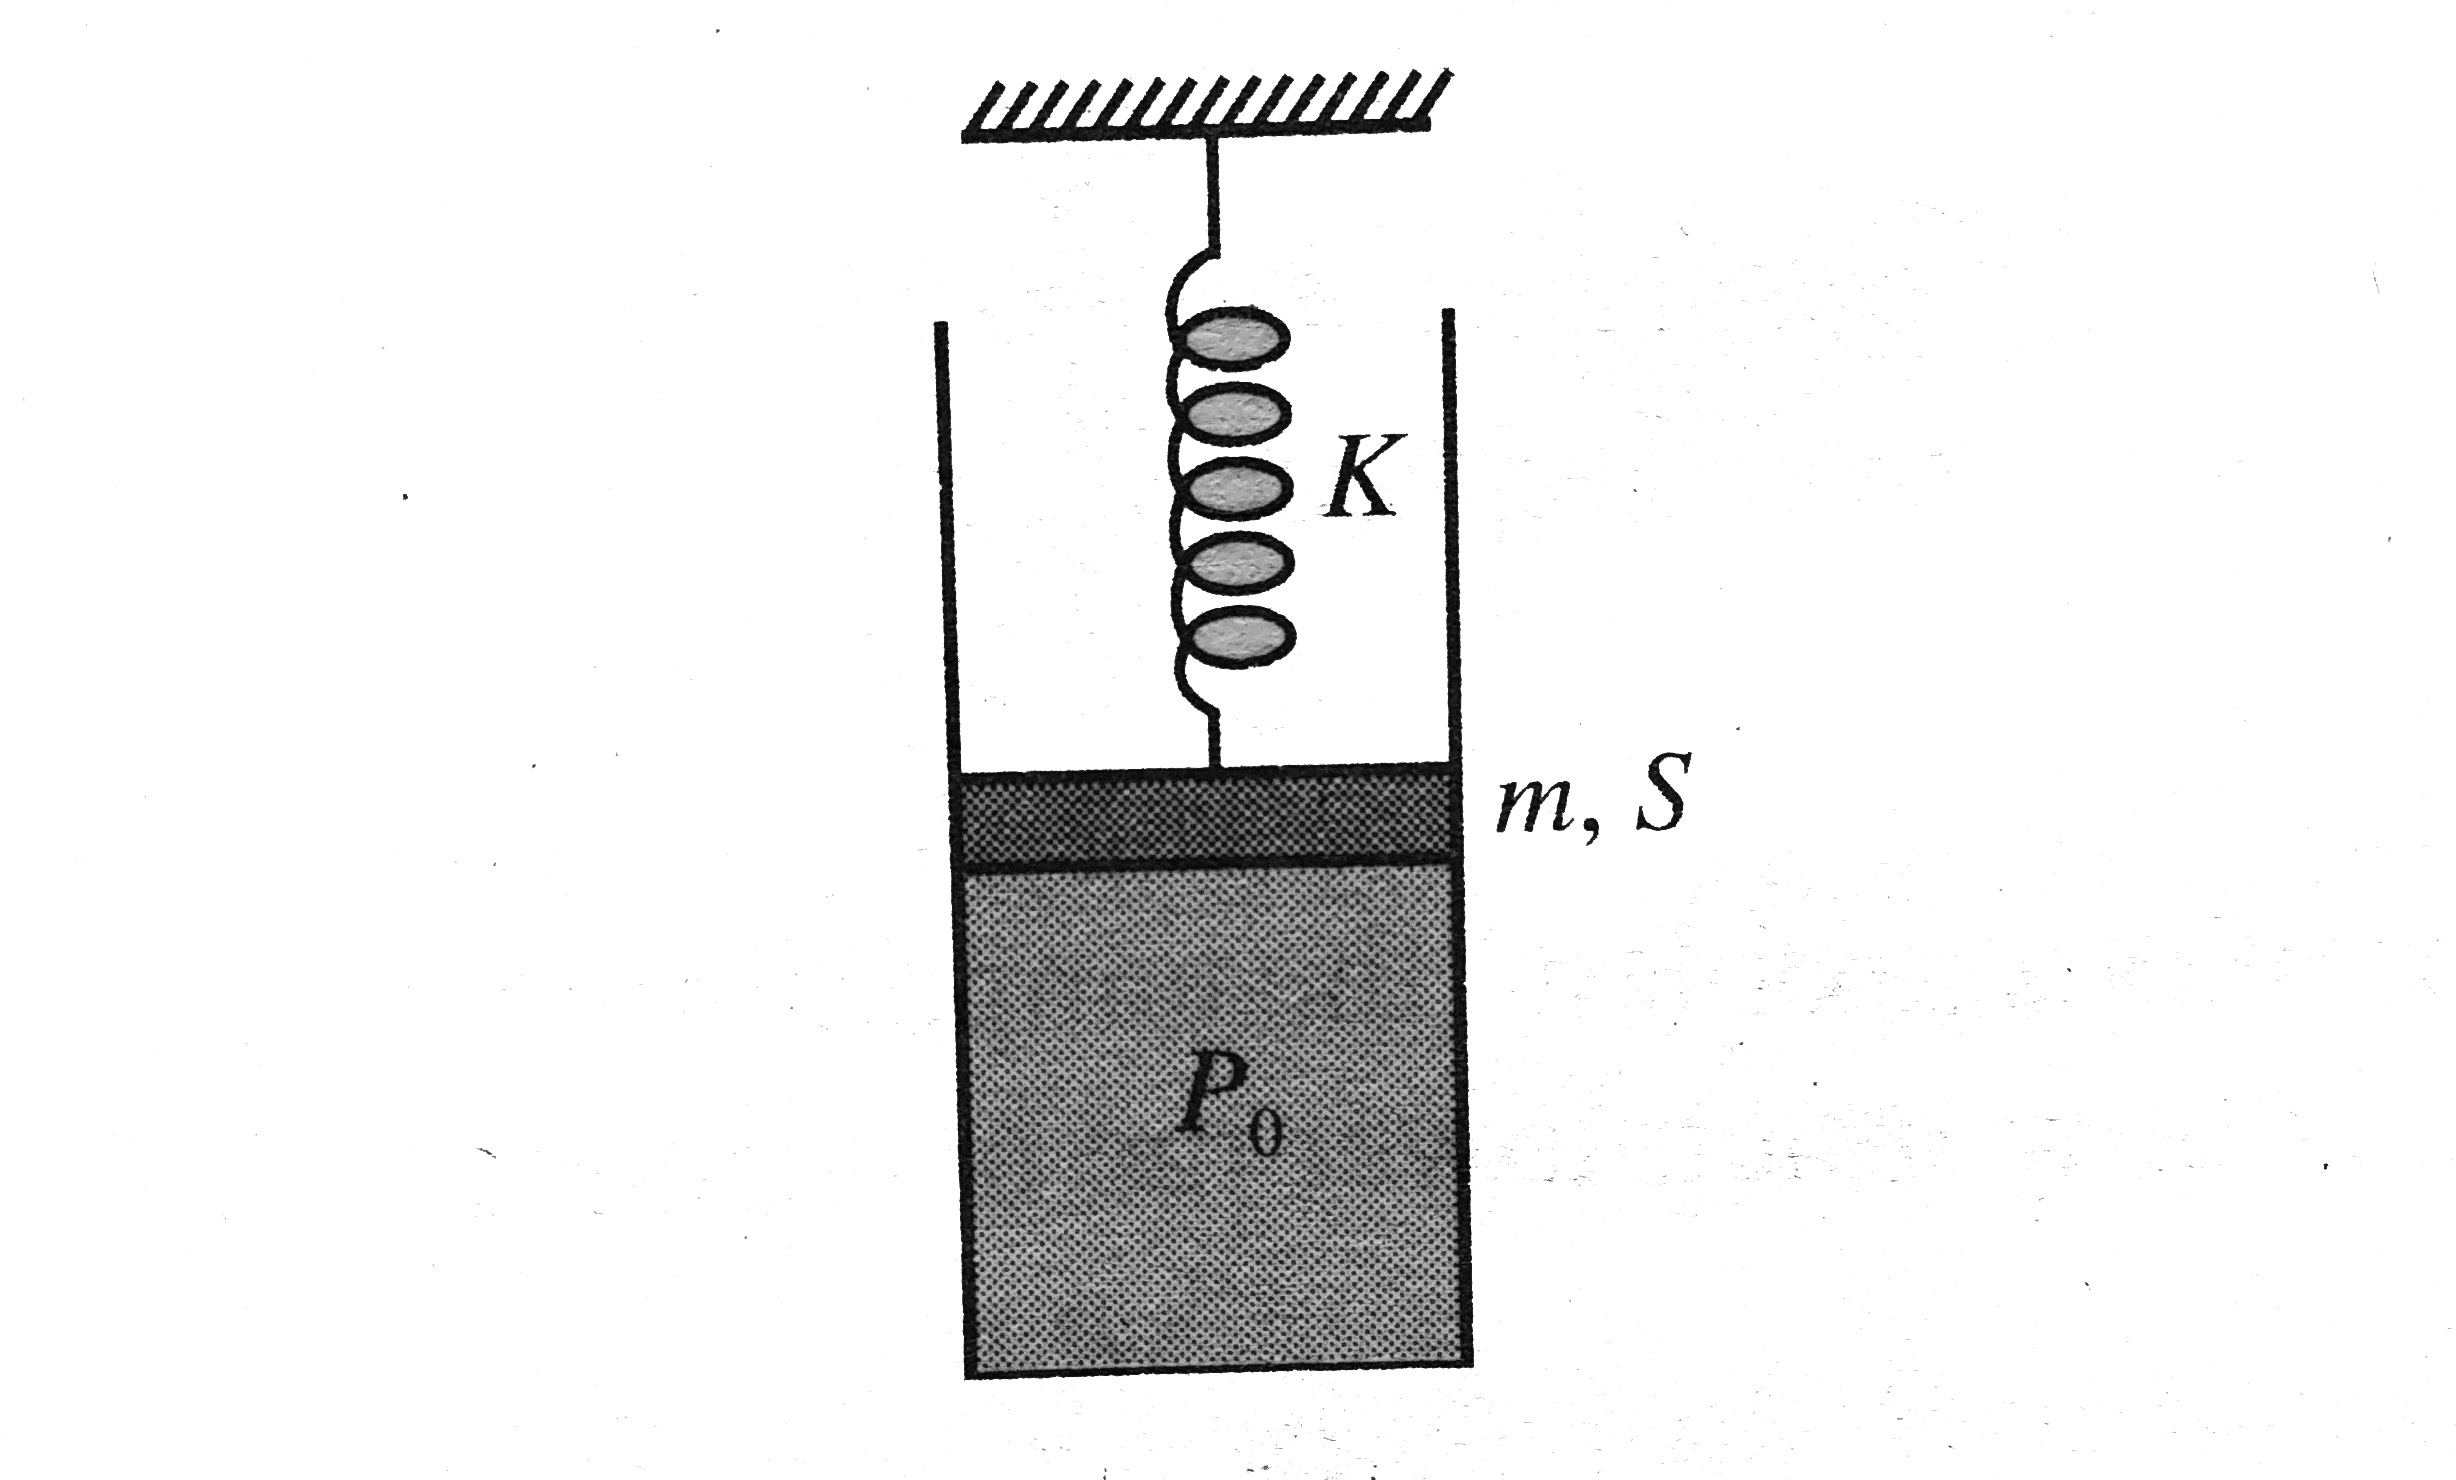 In the arrangement shown in Fig. gas is thermally insulated. An ideal gas is filled in the cylinder having pressure P(0) (gt atmospheric pressure P(a)). The spring of force constant K is initially unstretched. The piston of mass m and area S is frictionless. In equilibrium, the piston rises up by distance x(0), then